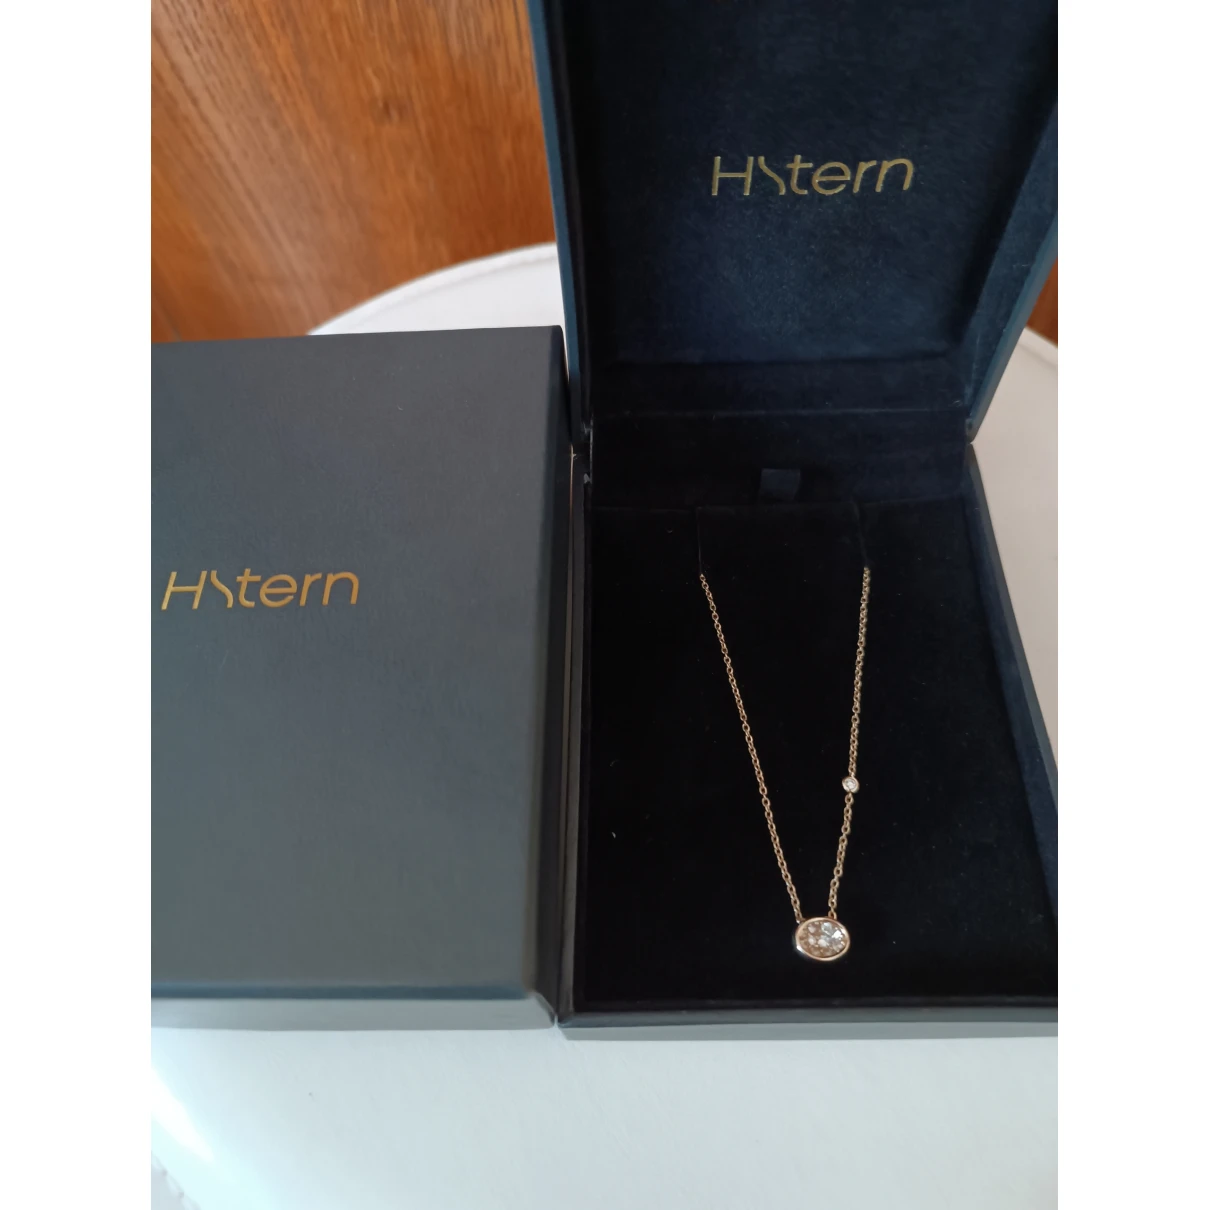 jewellery H. Stern necklaces for Female Yellow gold. Used condition